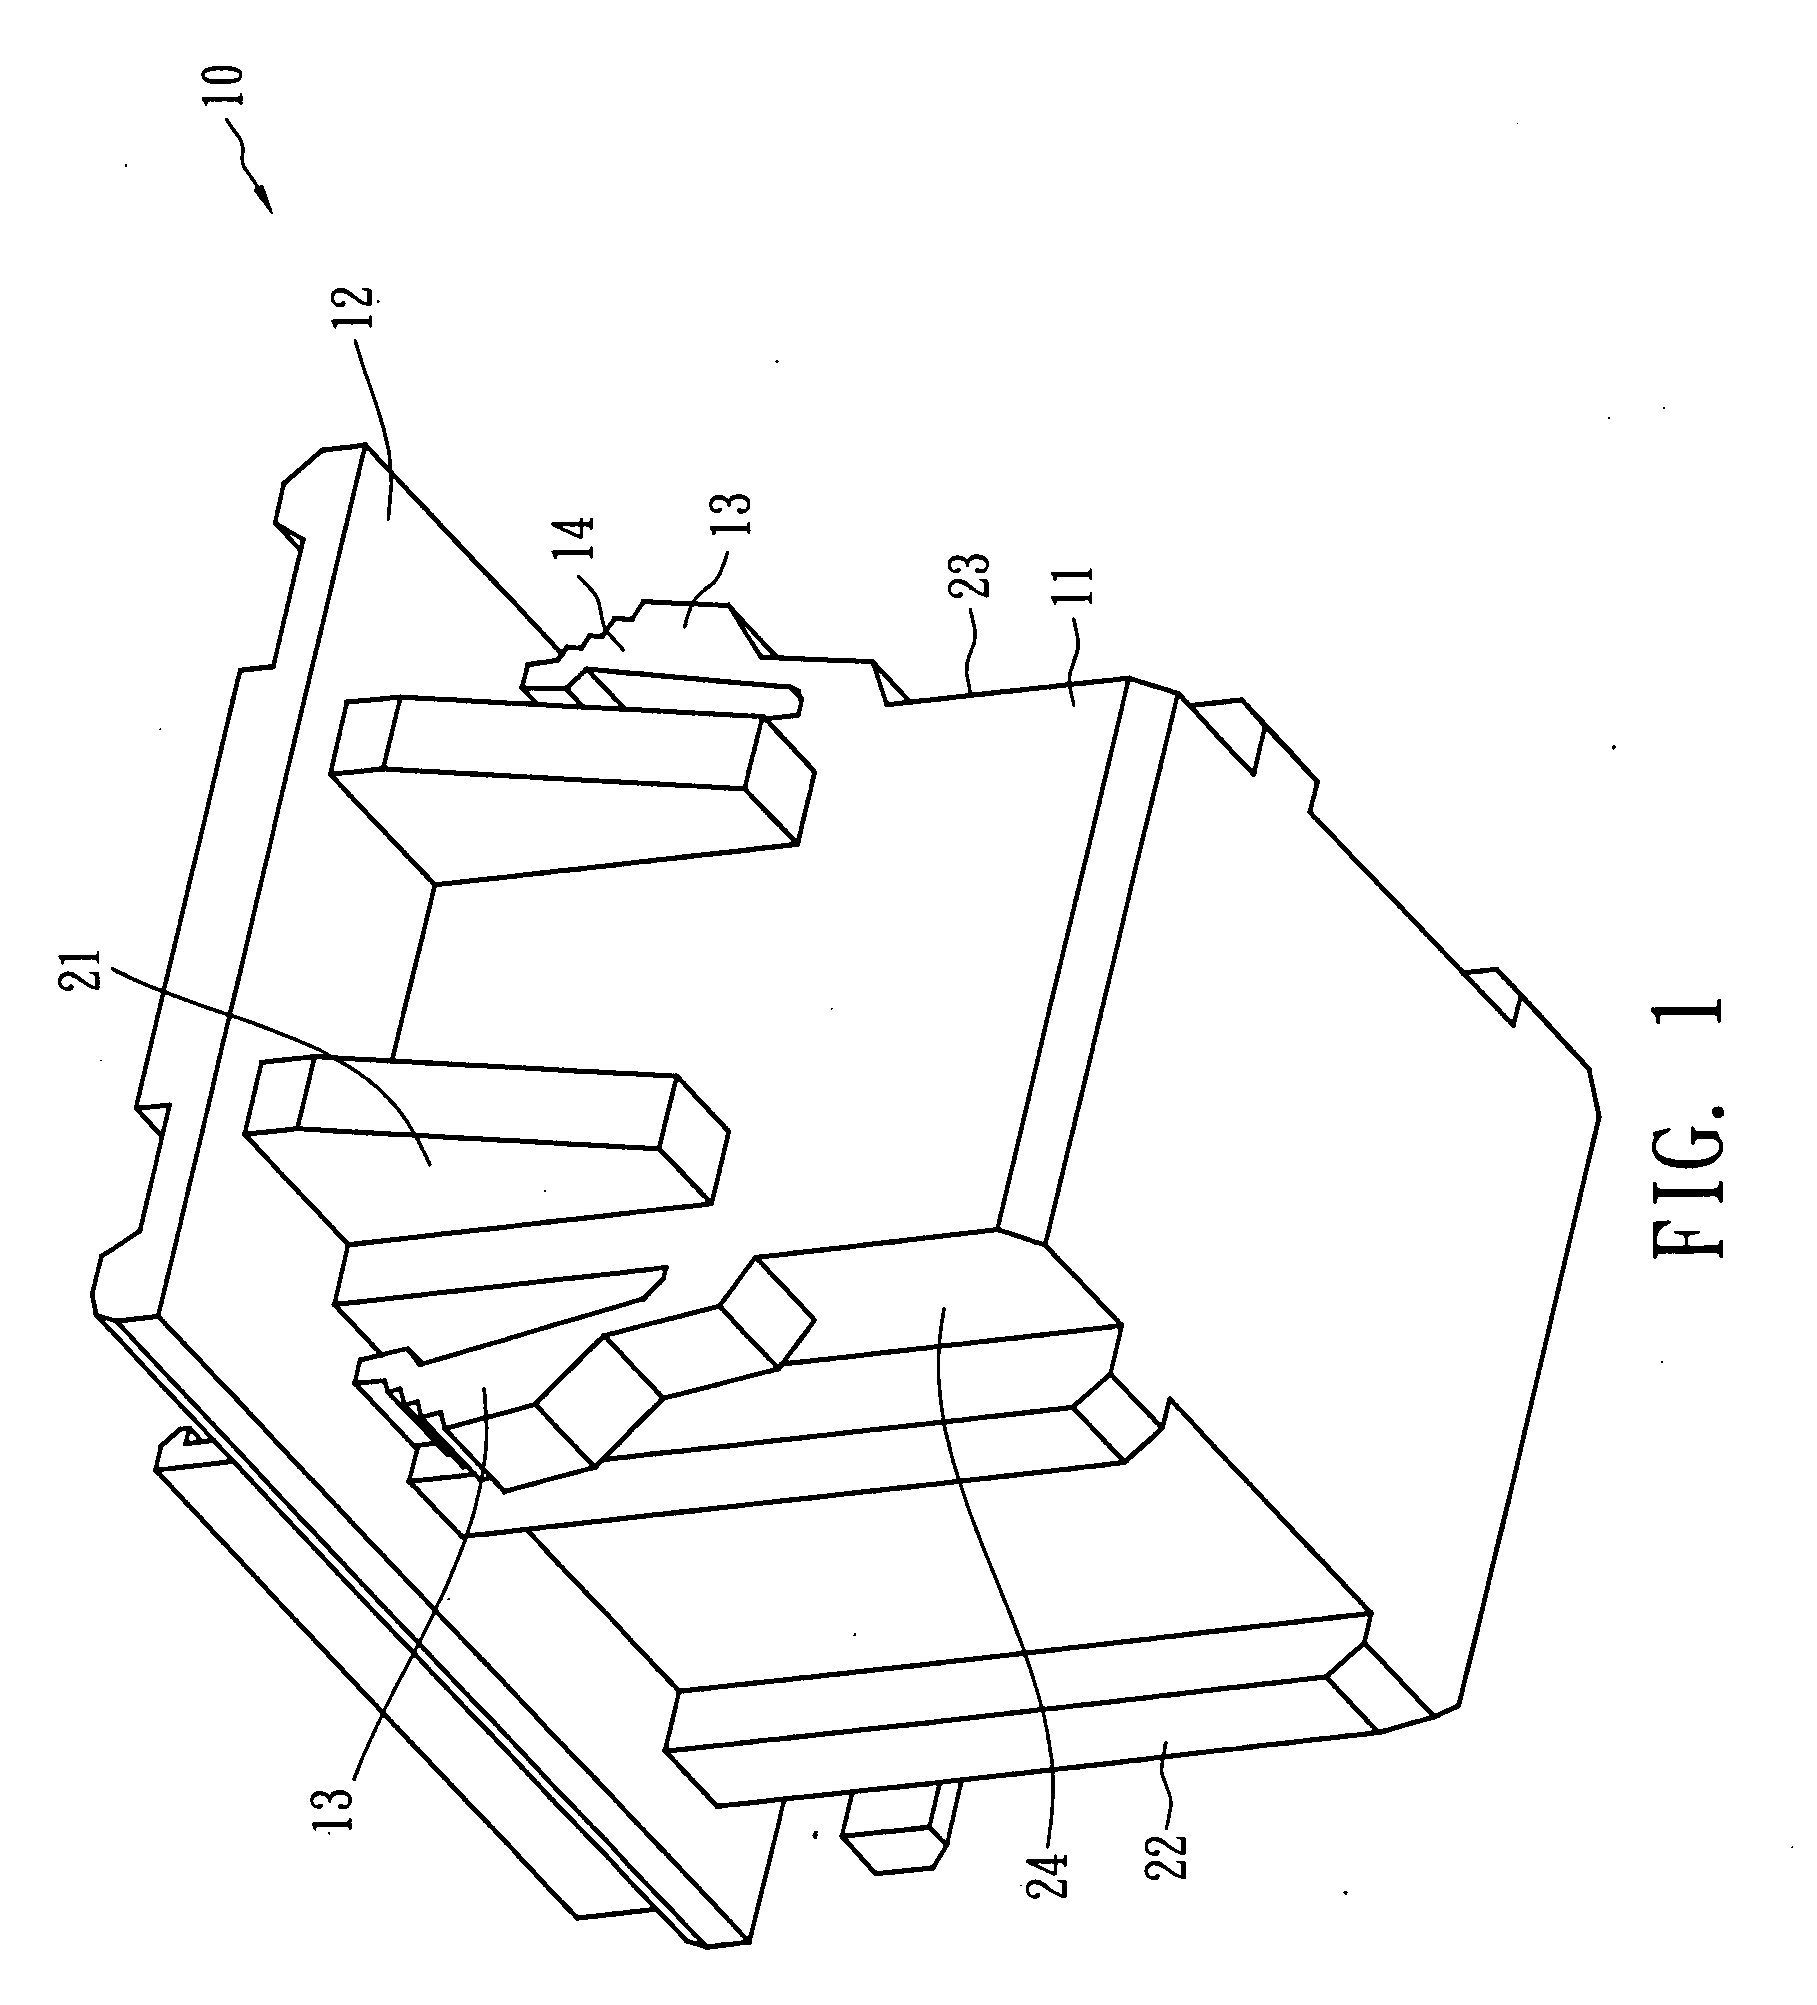 Backlight unit and lamp socket thereof